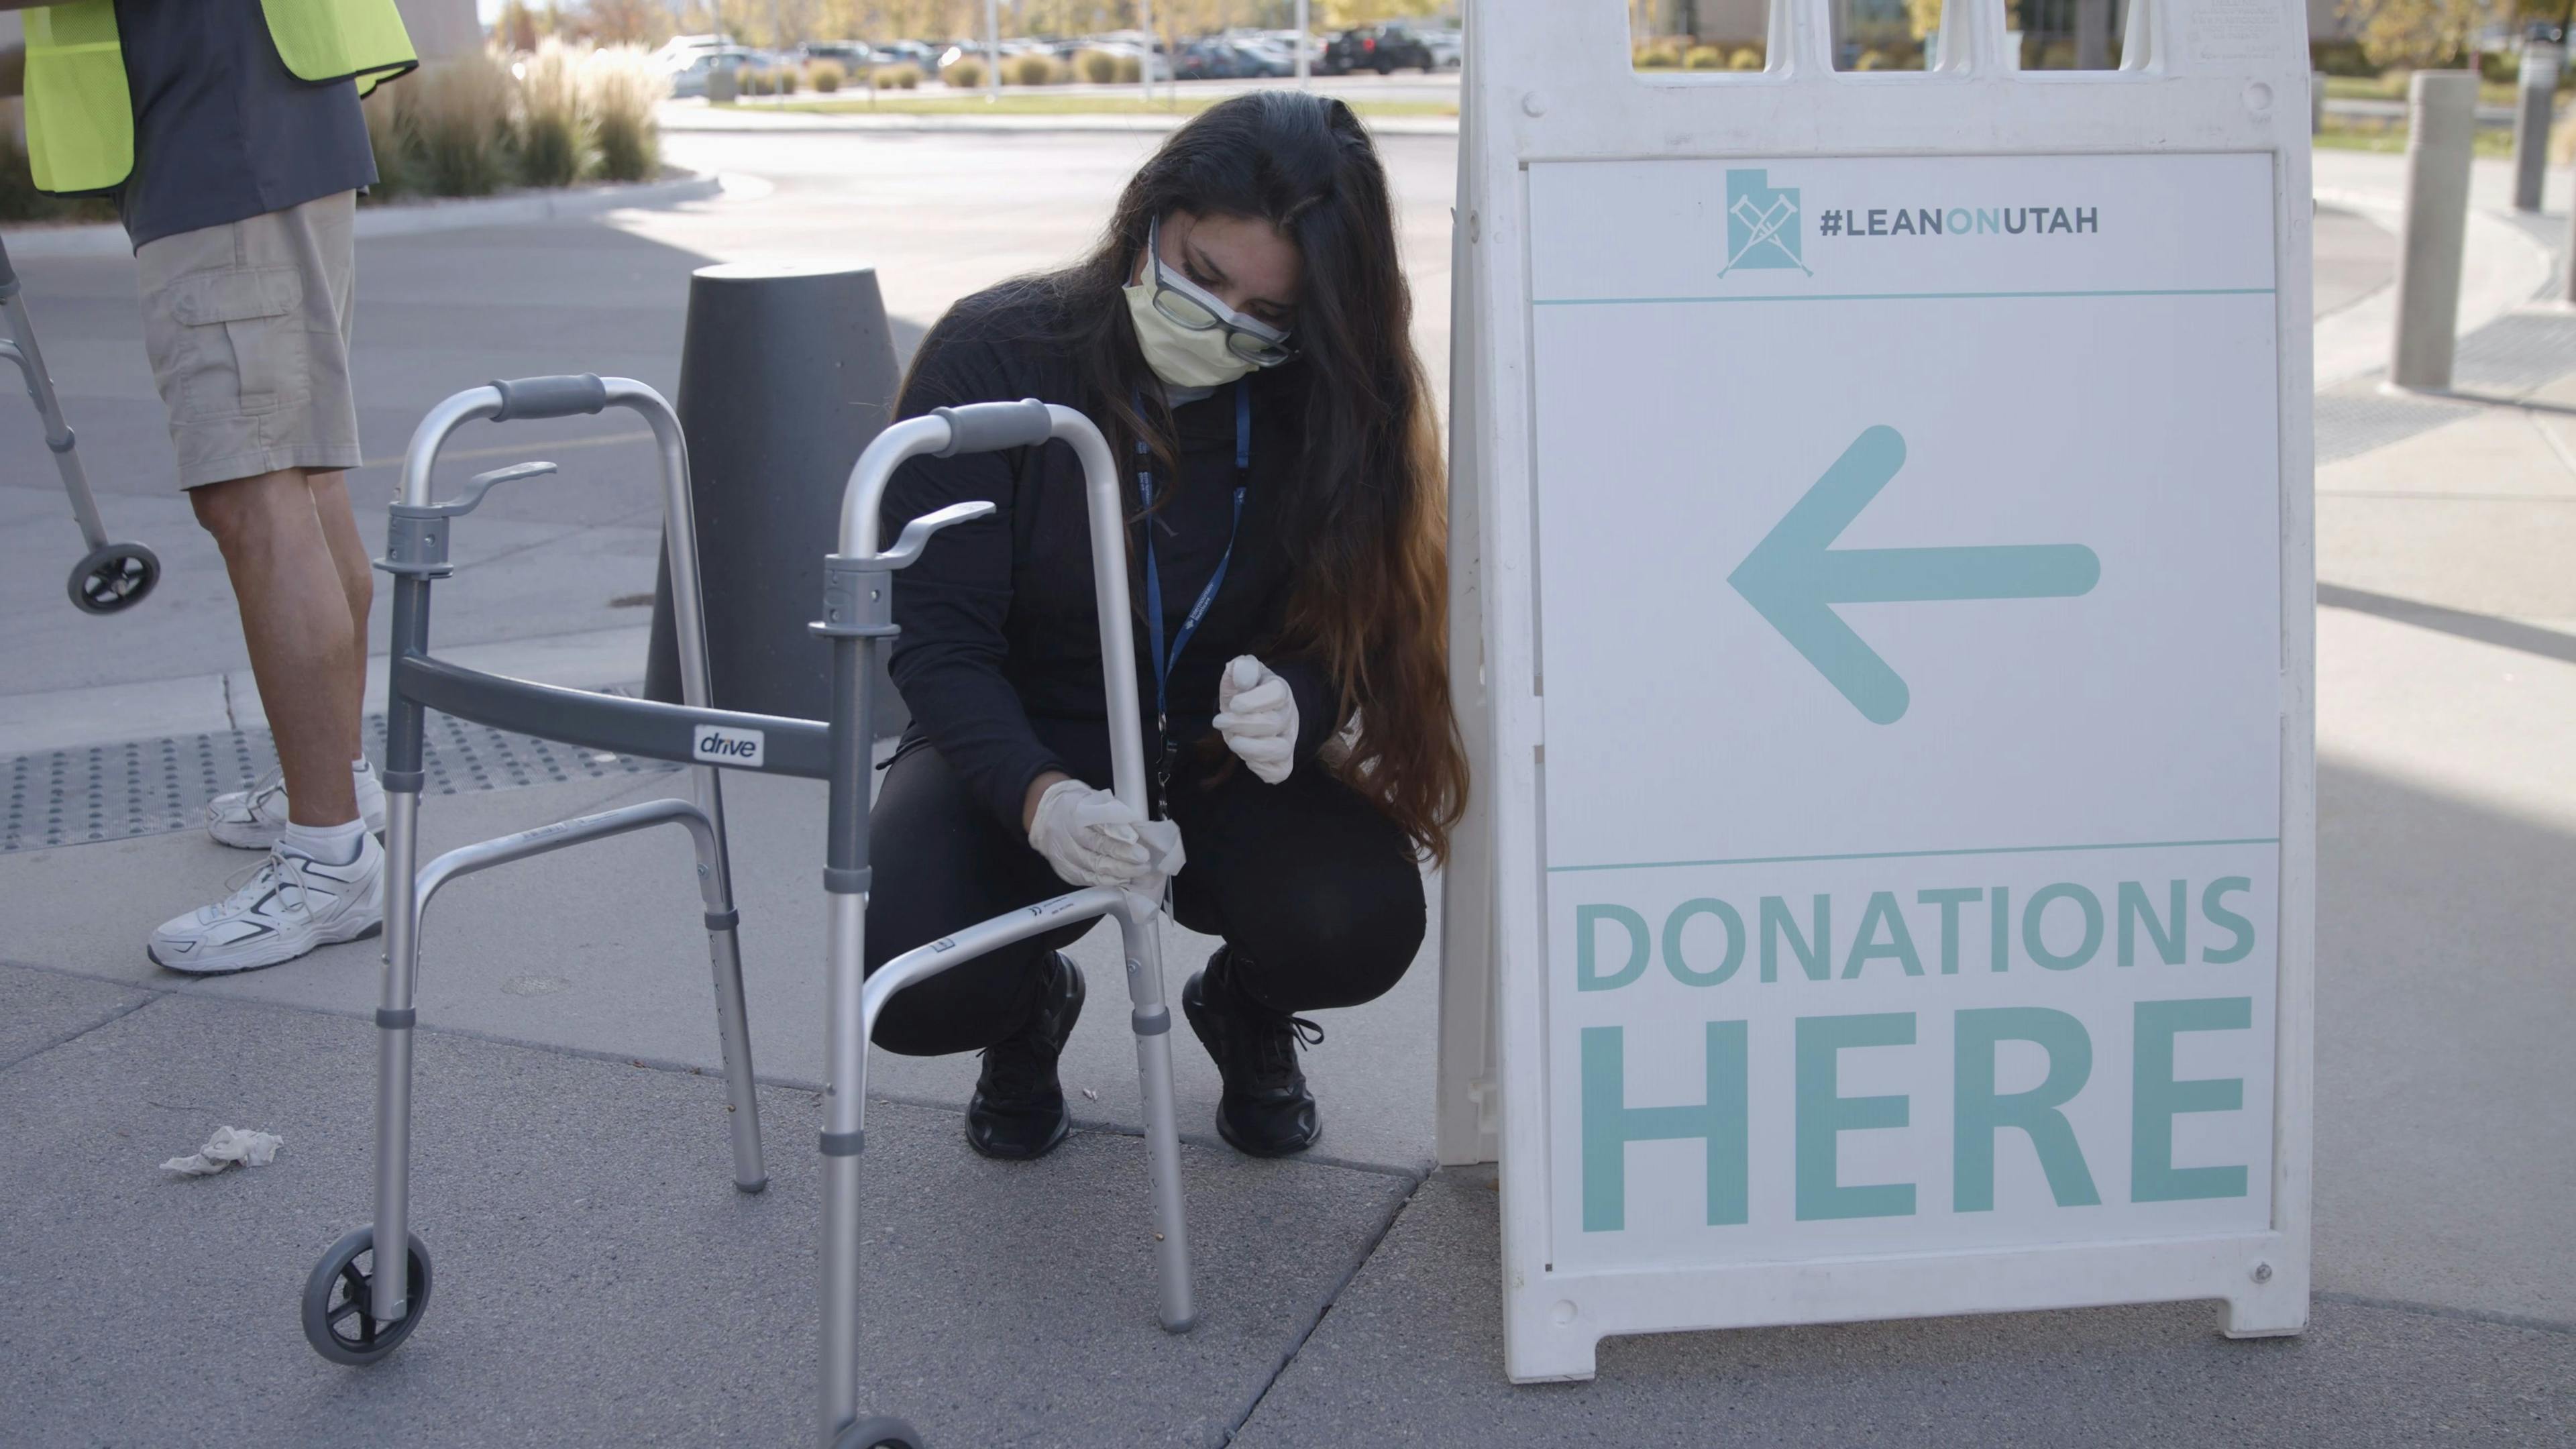 Intermountain Healthcare and other hospitals in Utah made a joint public appeal for crutches, walkers and other items. The "LeanOnUtah" campaign generated thousands of donated items. (Photo provided by Intermountain Healthcare)